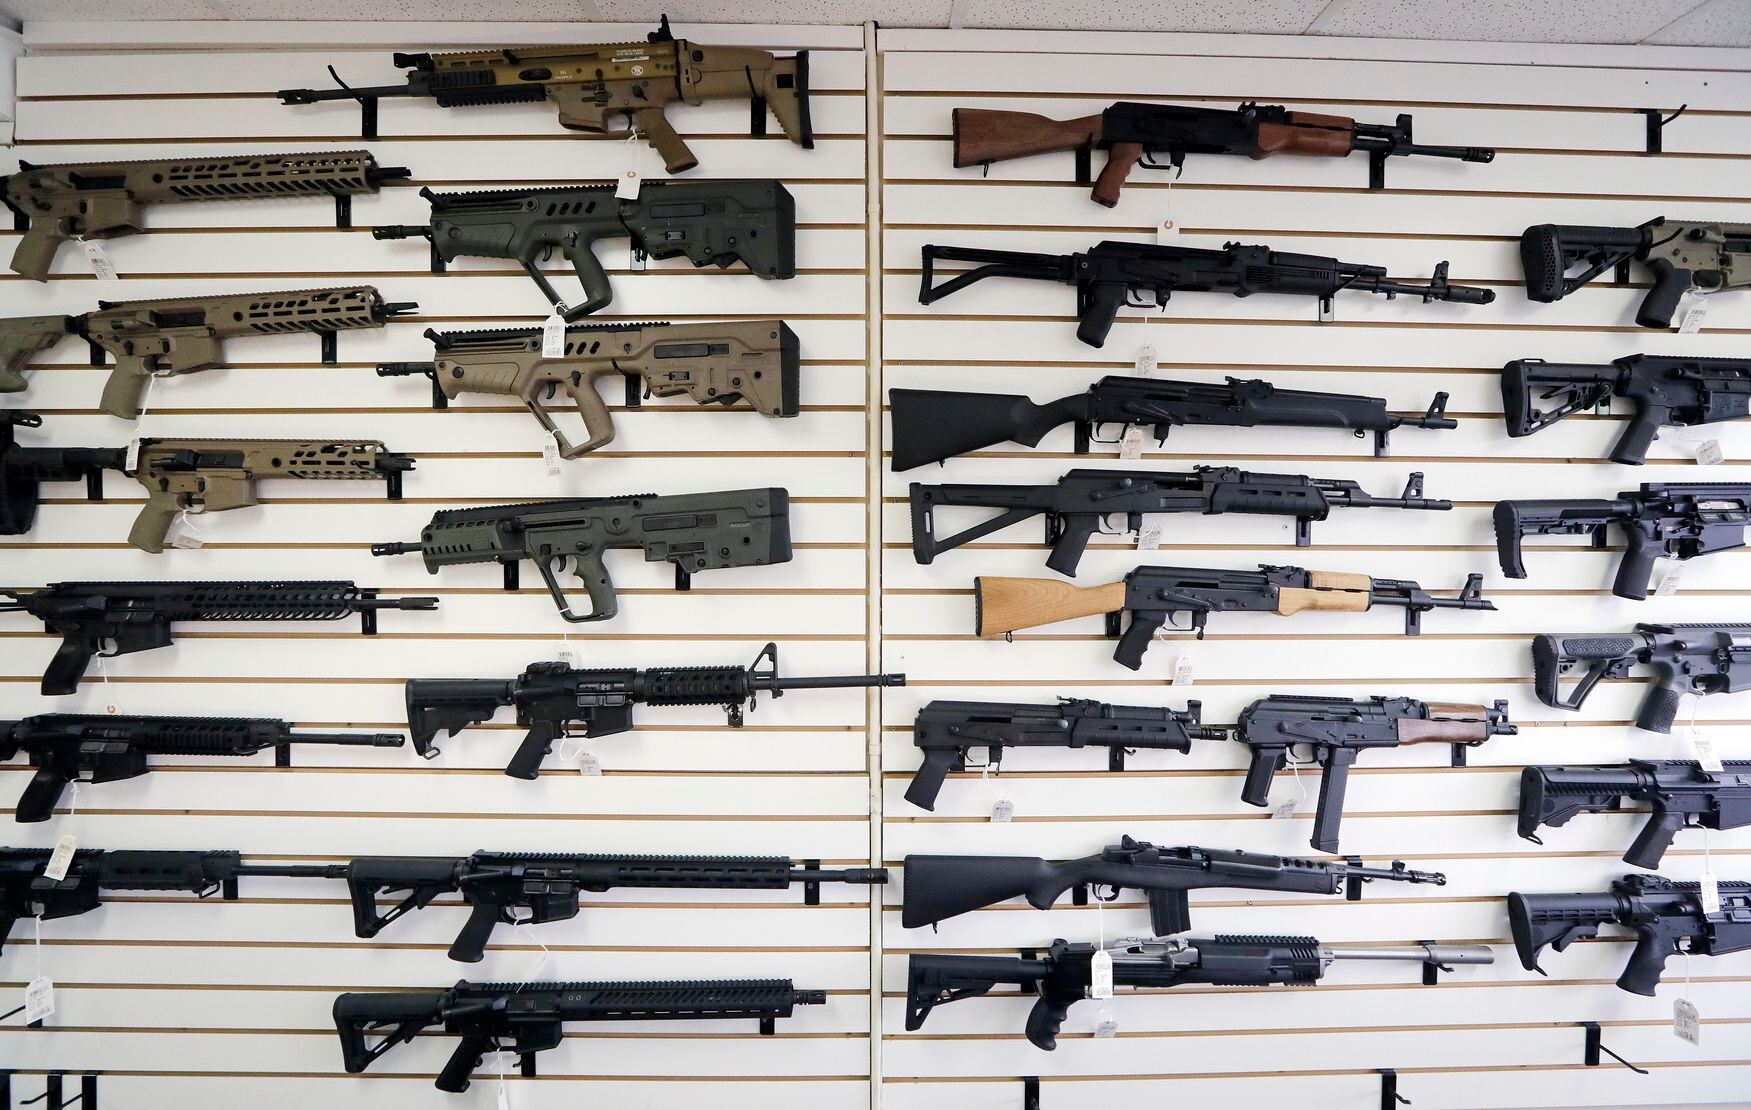 what types of guns are used in mass shootings